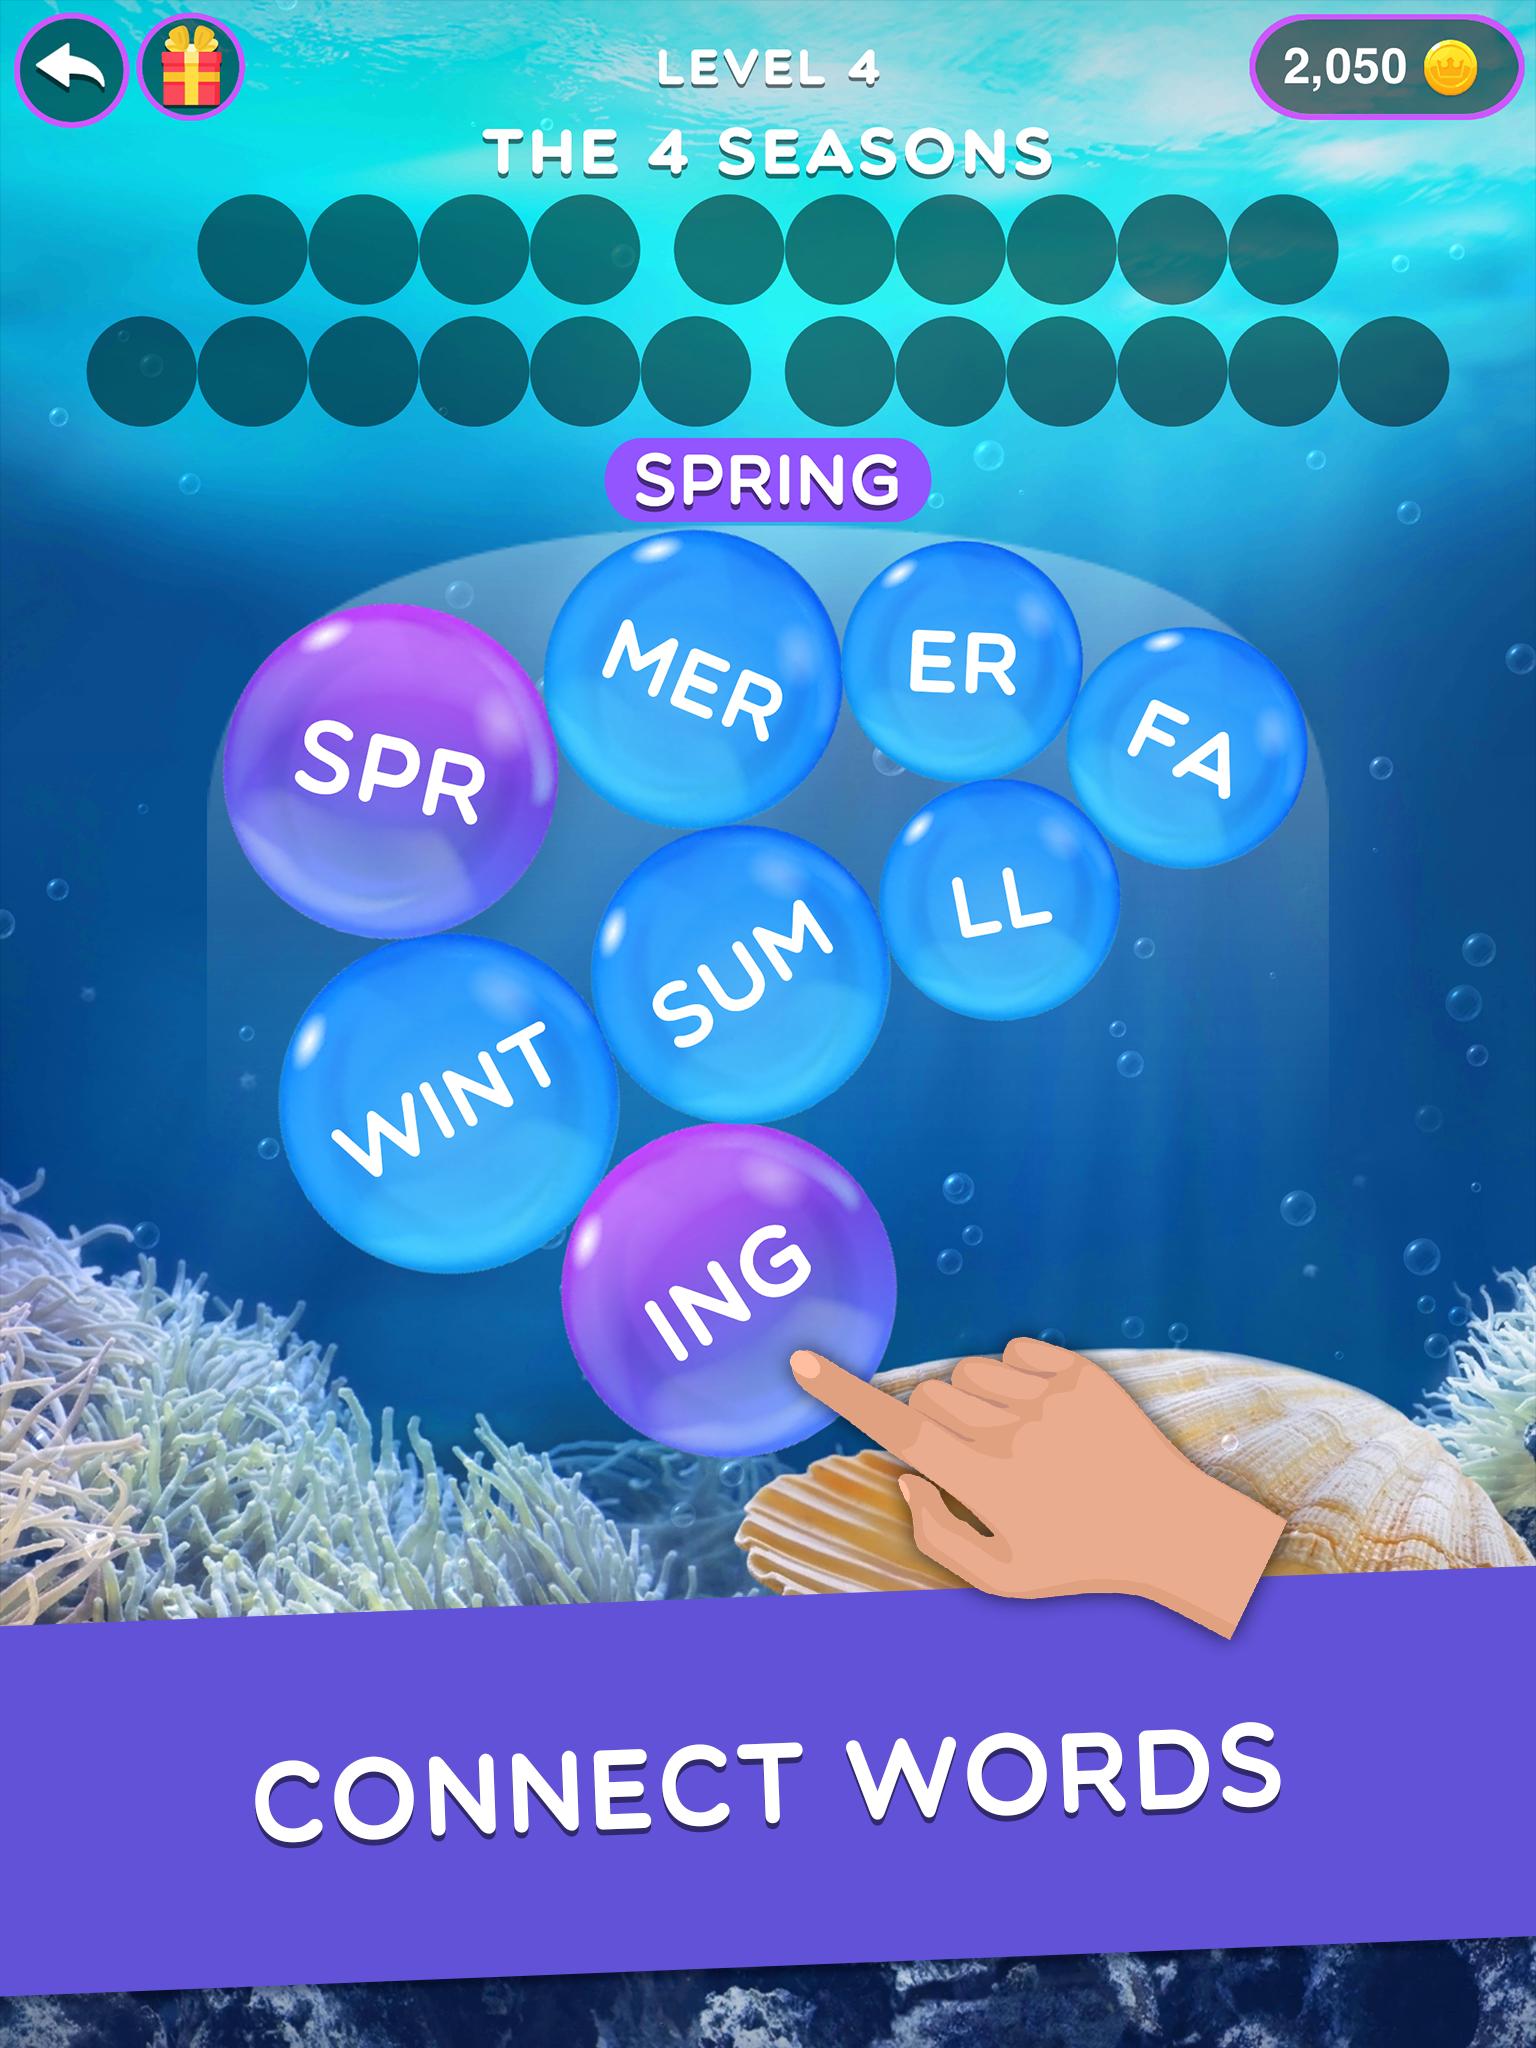 Magnetic Words Search & Connect Word Game 1.0.5 Screenshot 7